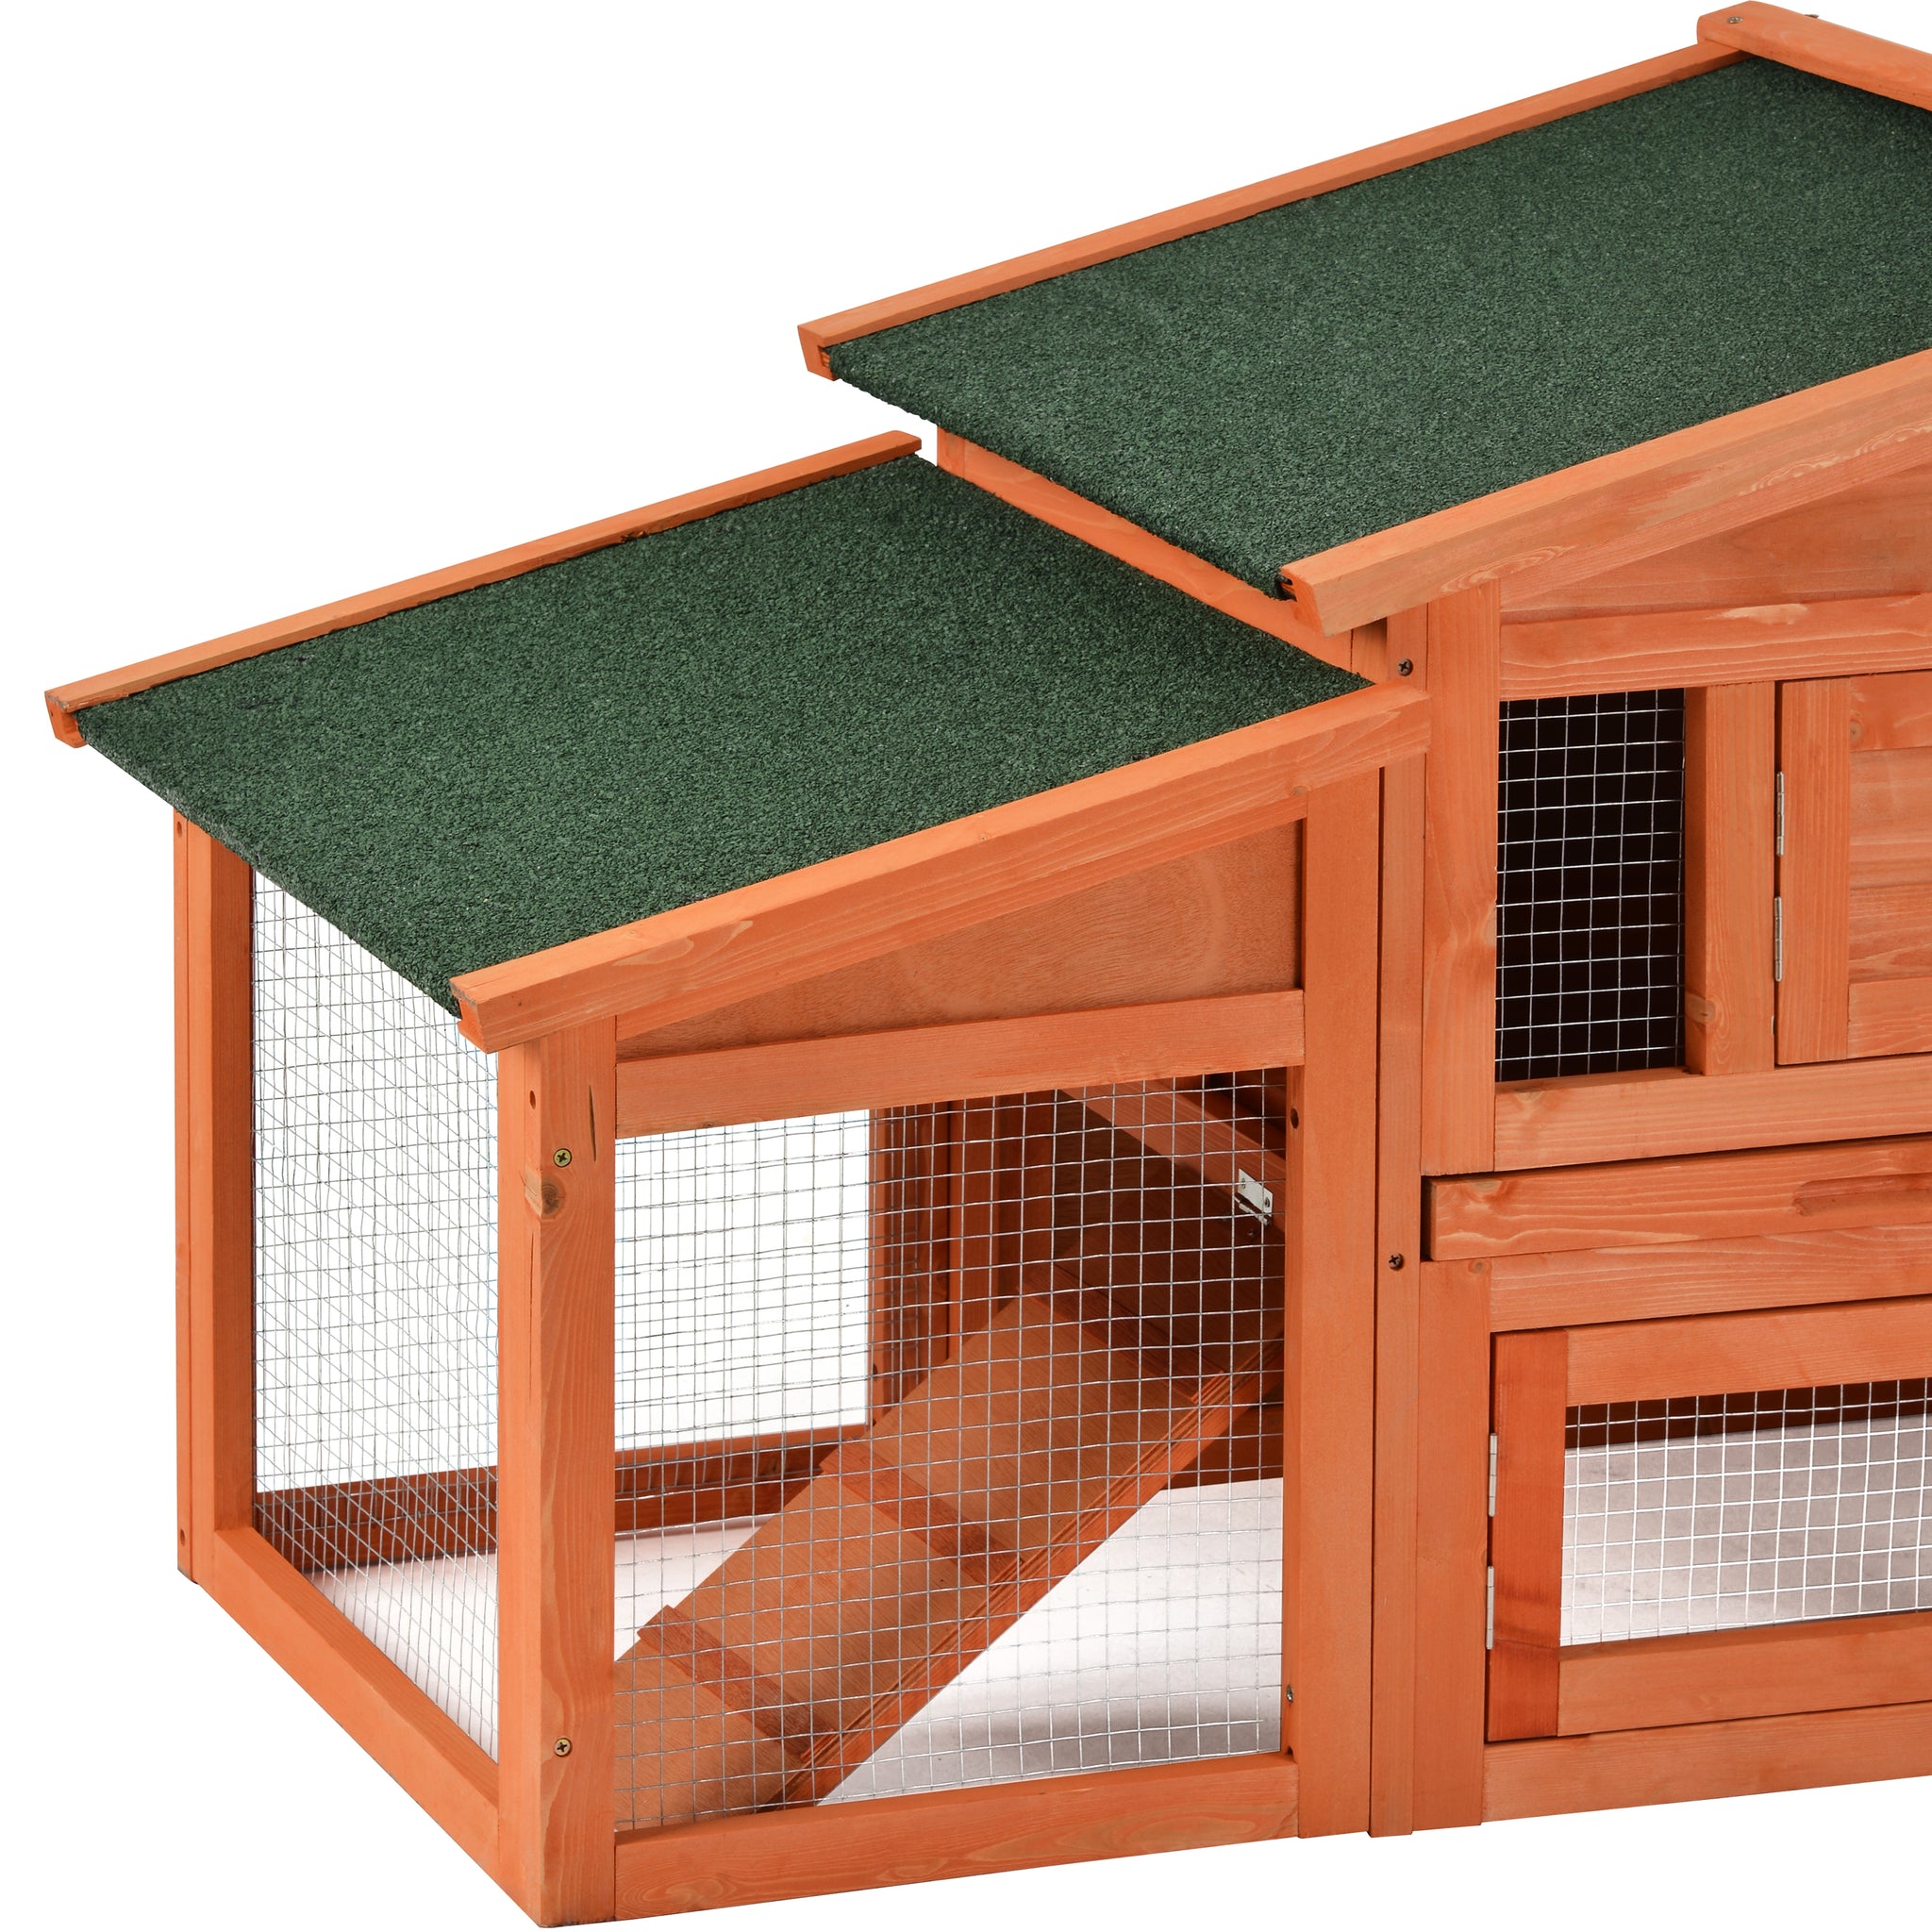 TOPMAX 70-Inch Wood Rabbit Hutch Outdoor Pet House Chicken Coop for Small Animals with 2 Run Play Area